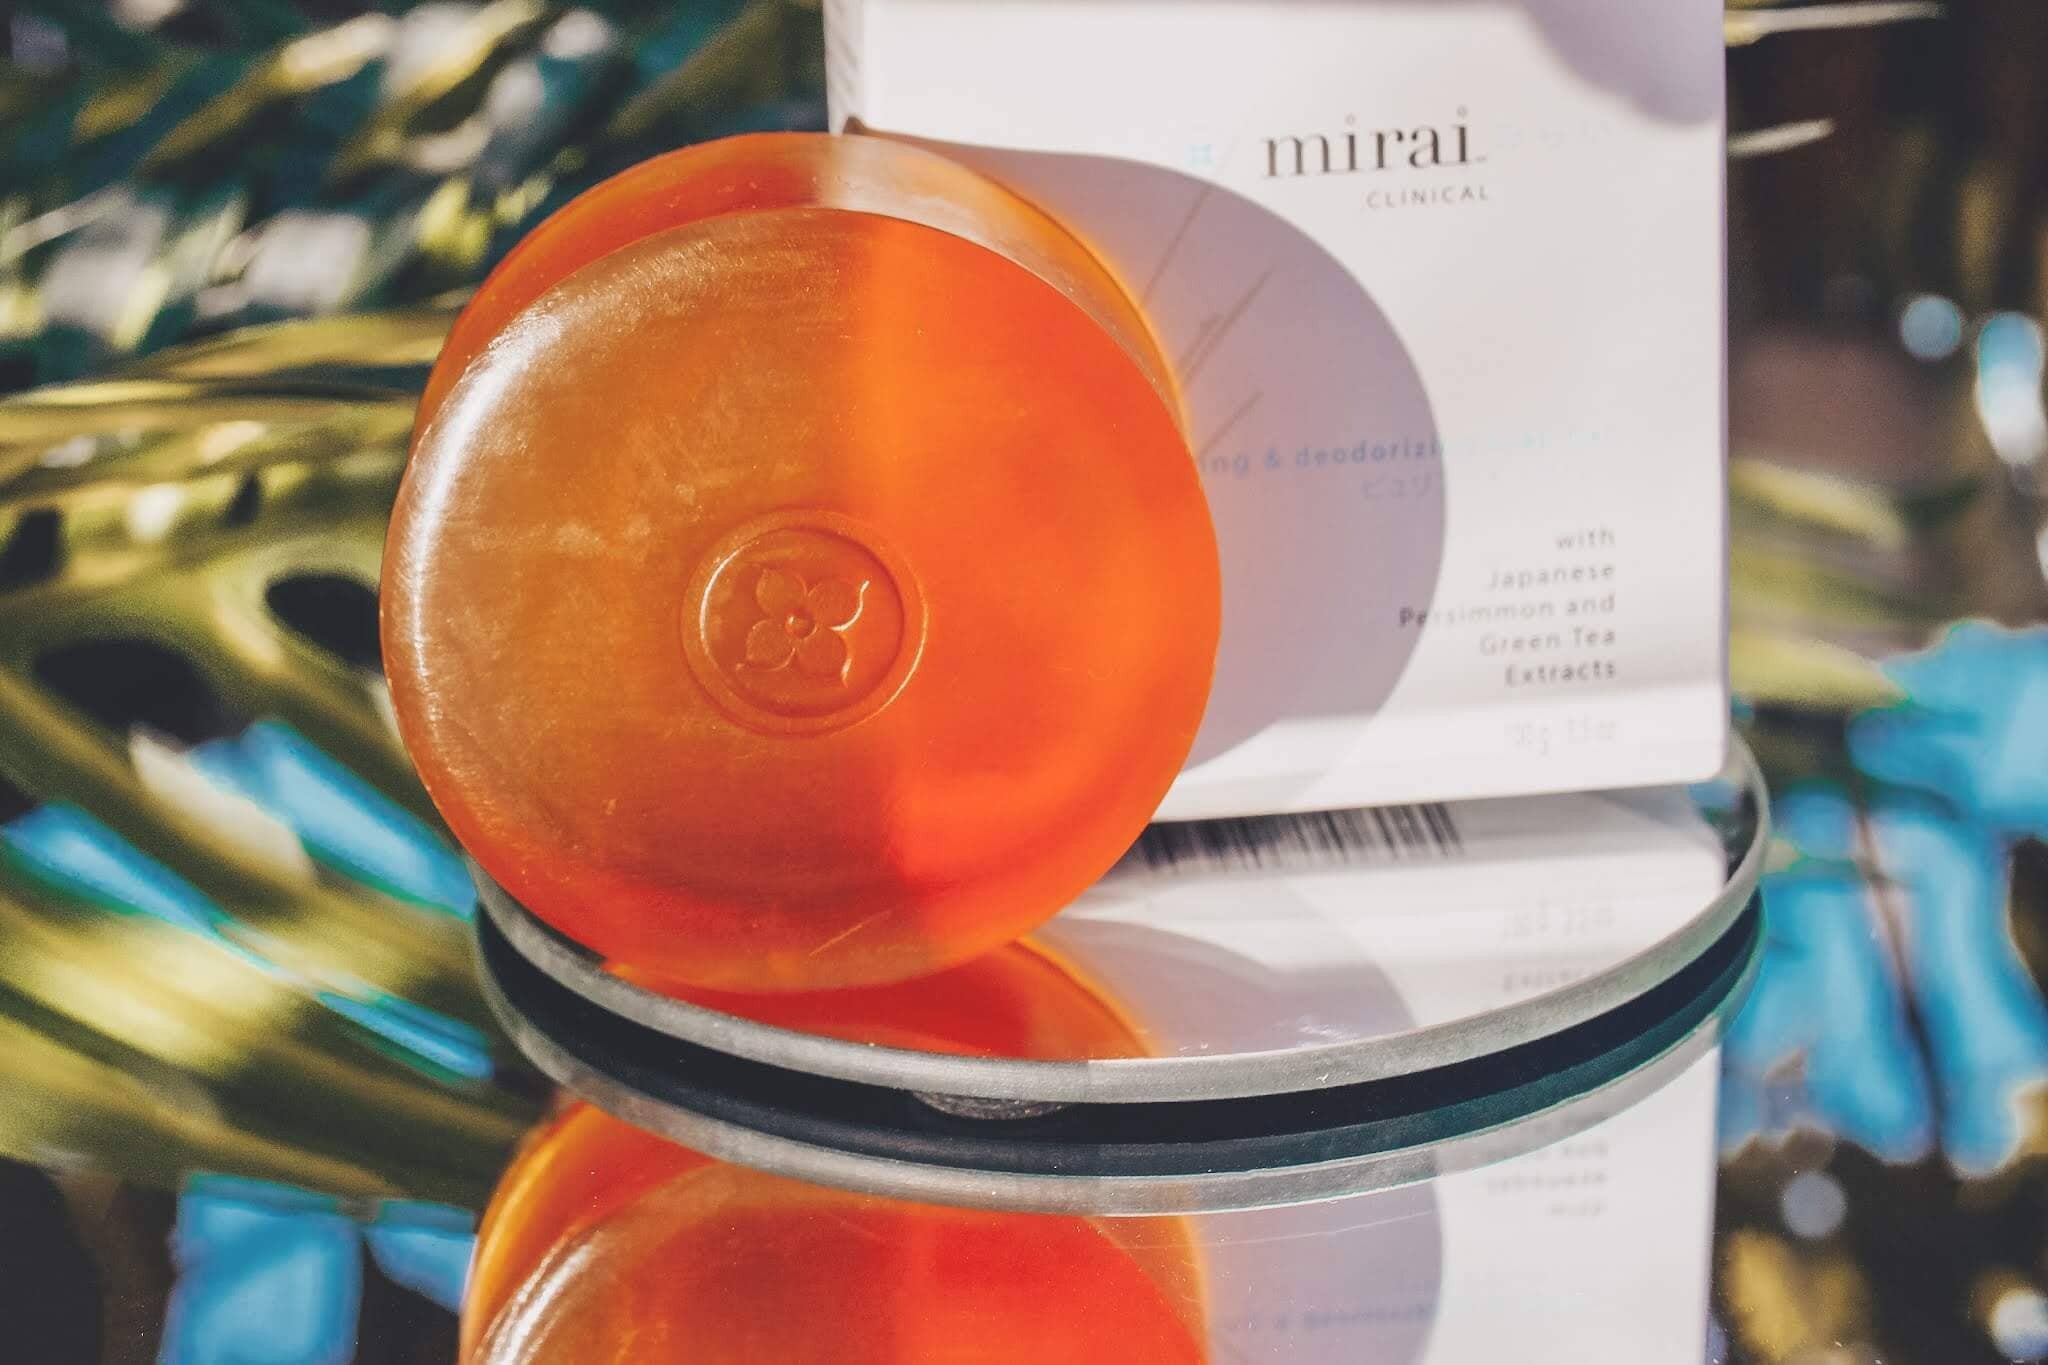 Mirai Clinical soap bar with Japanese persimmon and green tea extracts, known for its natural deodorizing properties to combat nonenal body odor.